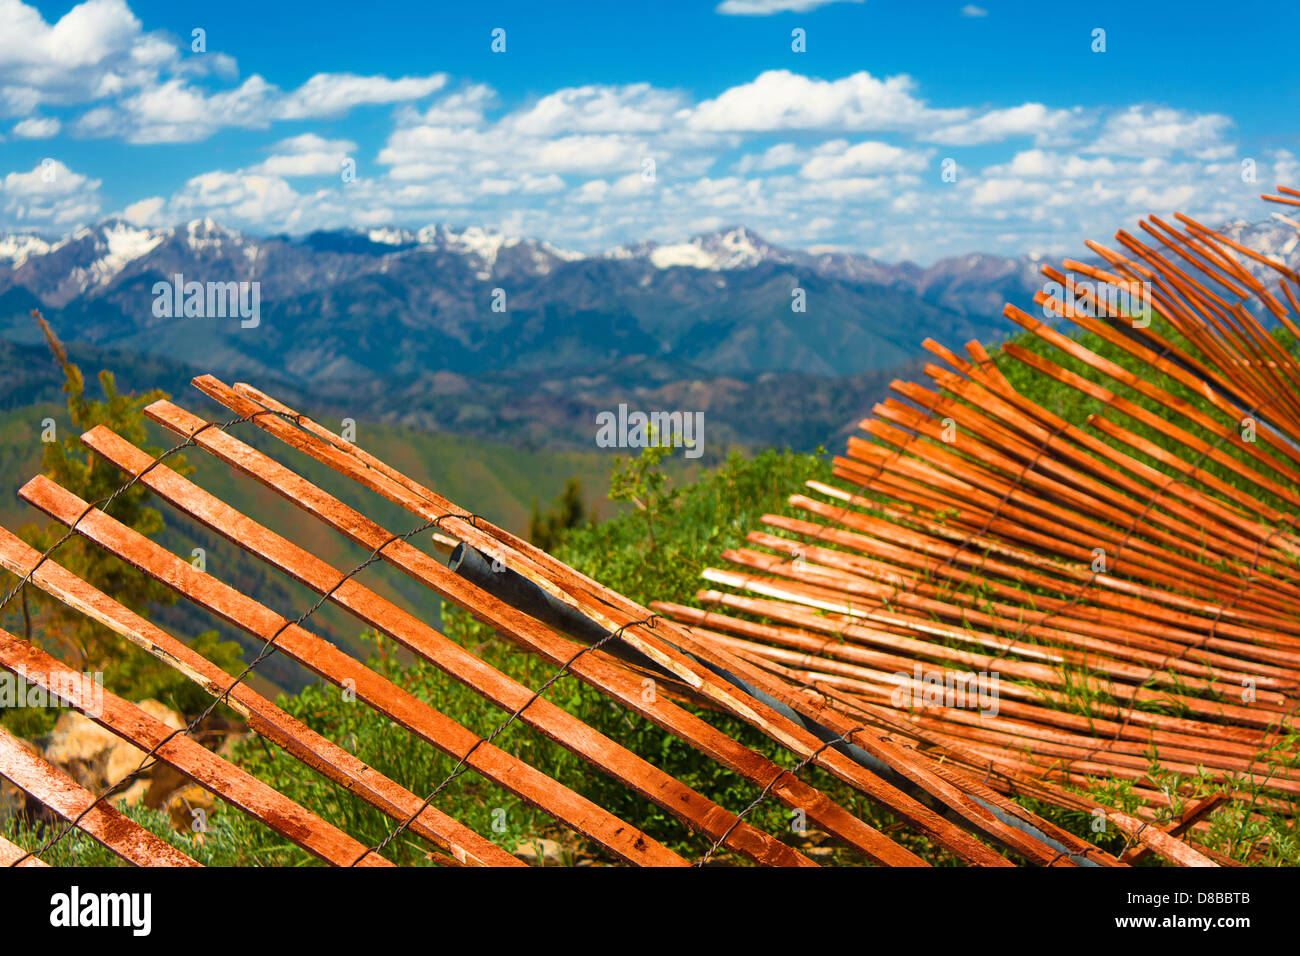 Orange wooden fence nearly falling down atop Bald Mountain in Sun Valley, Idaho, with snow-capped mountains in background Stock Photo